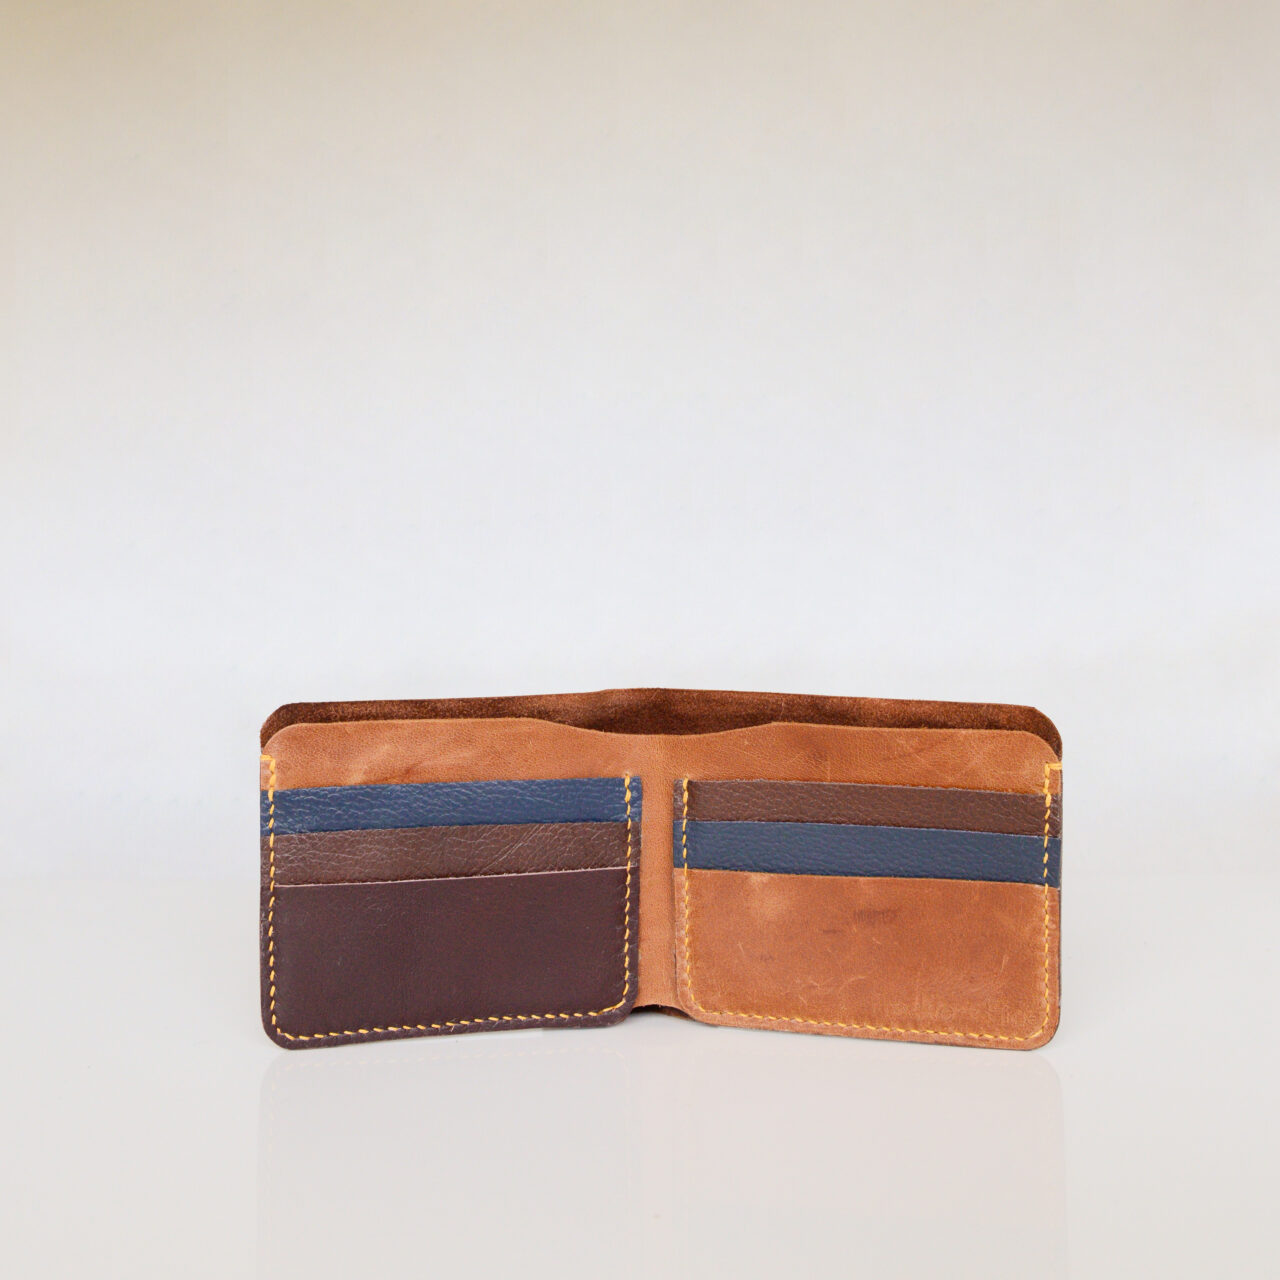 Inside view of leather bifold wallet. Tan, brown and dark blue leather with yellow stitching.